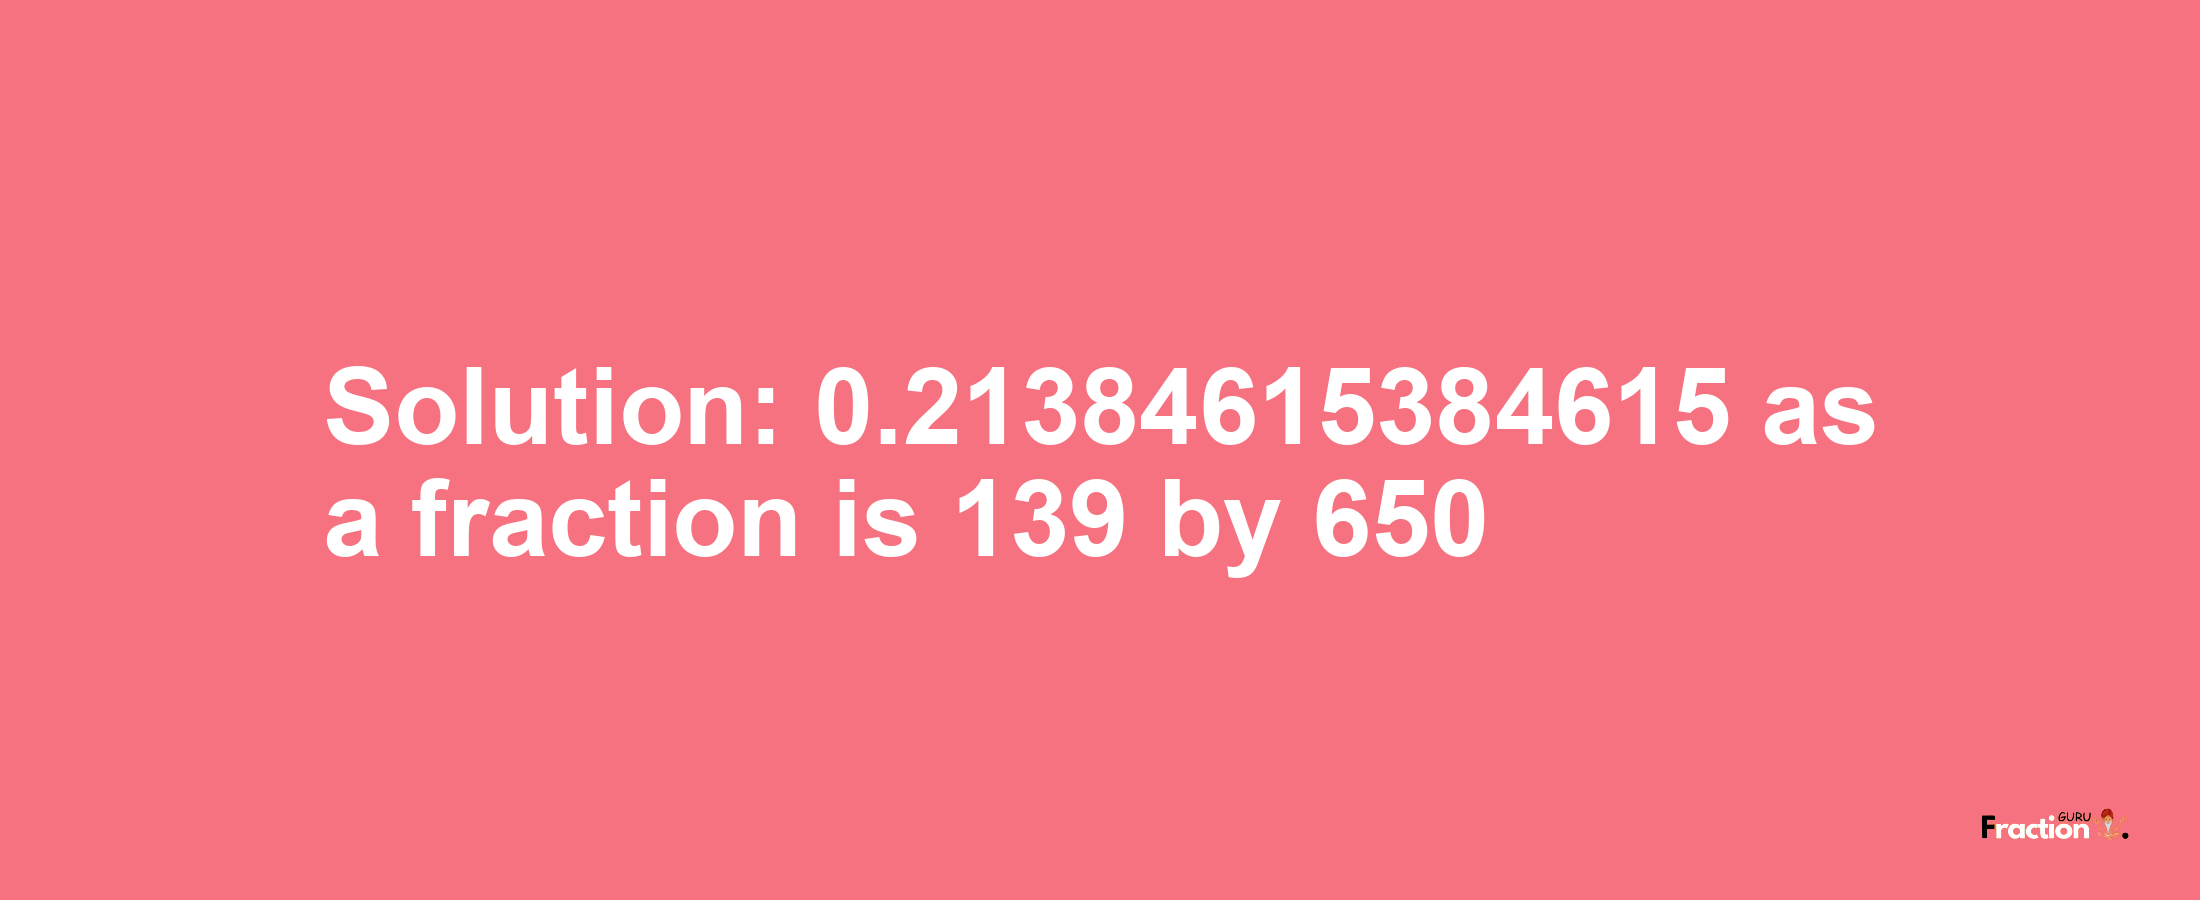 Solution:0.21384615384615 as a fraction is 139/650